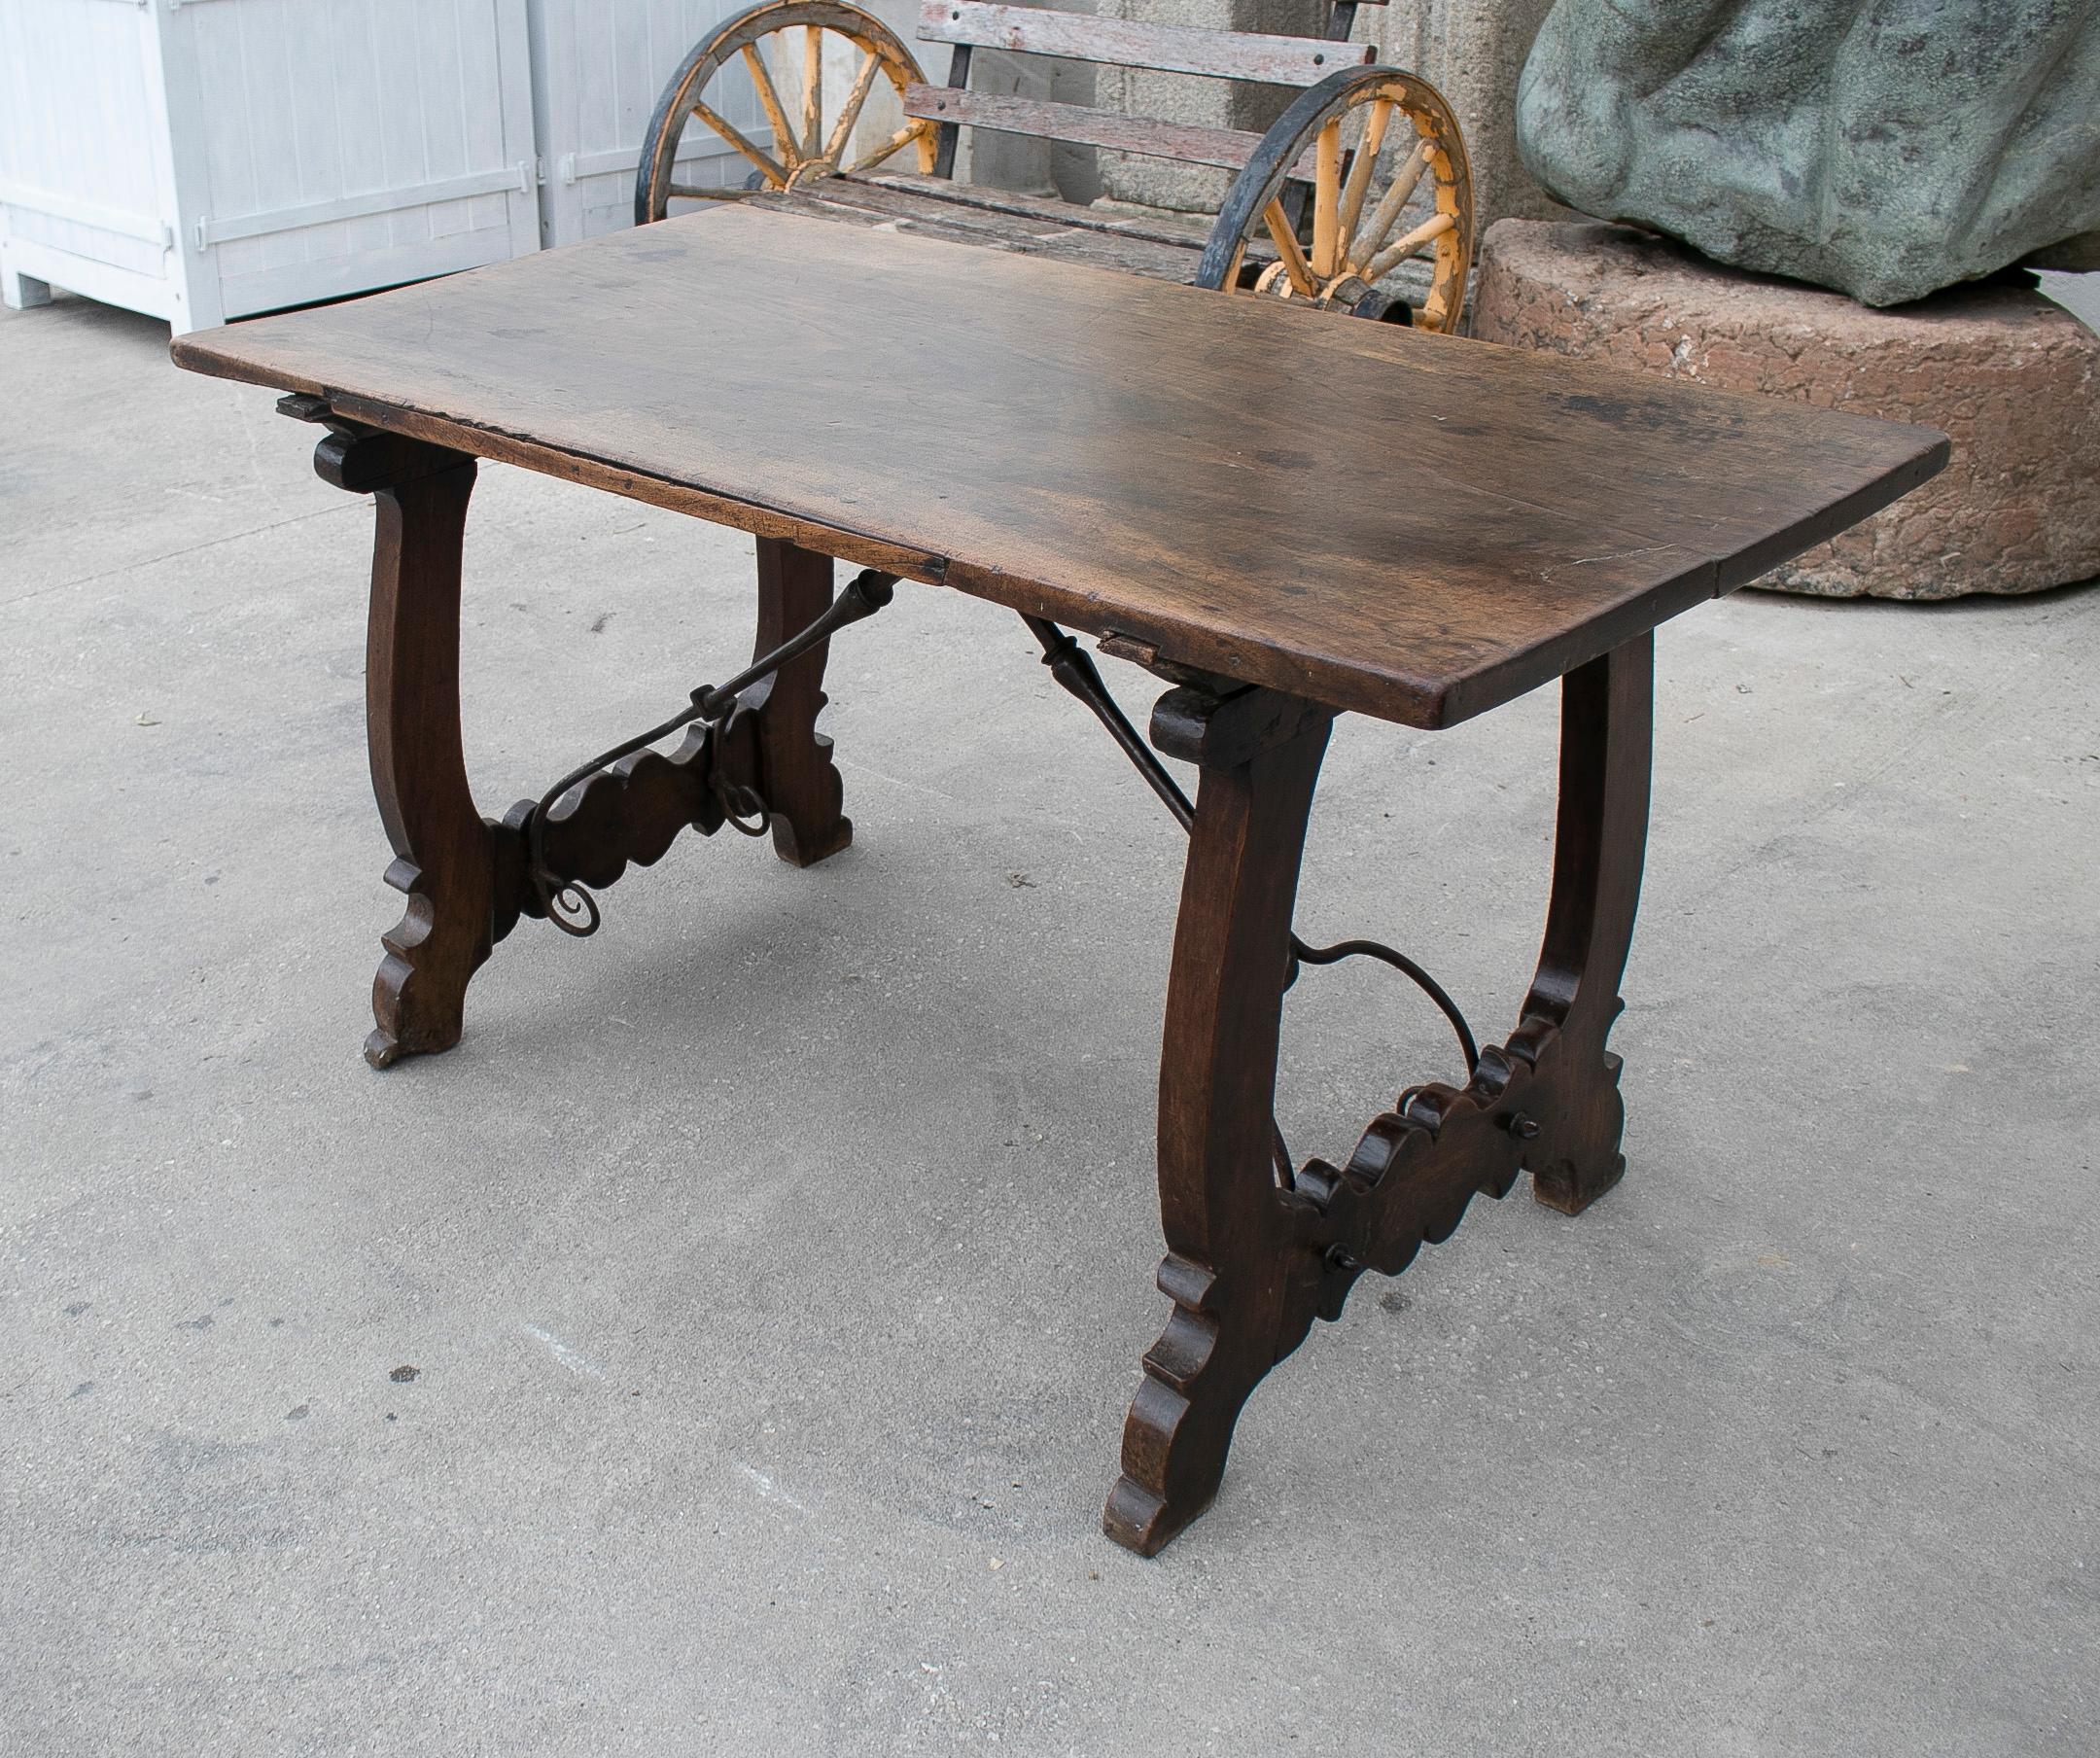 Antique 17th century Spanish walnut table with lira legs and original crossbeams and ironware.